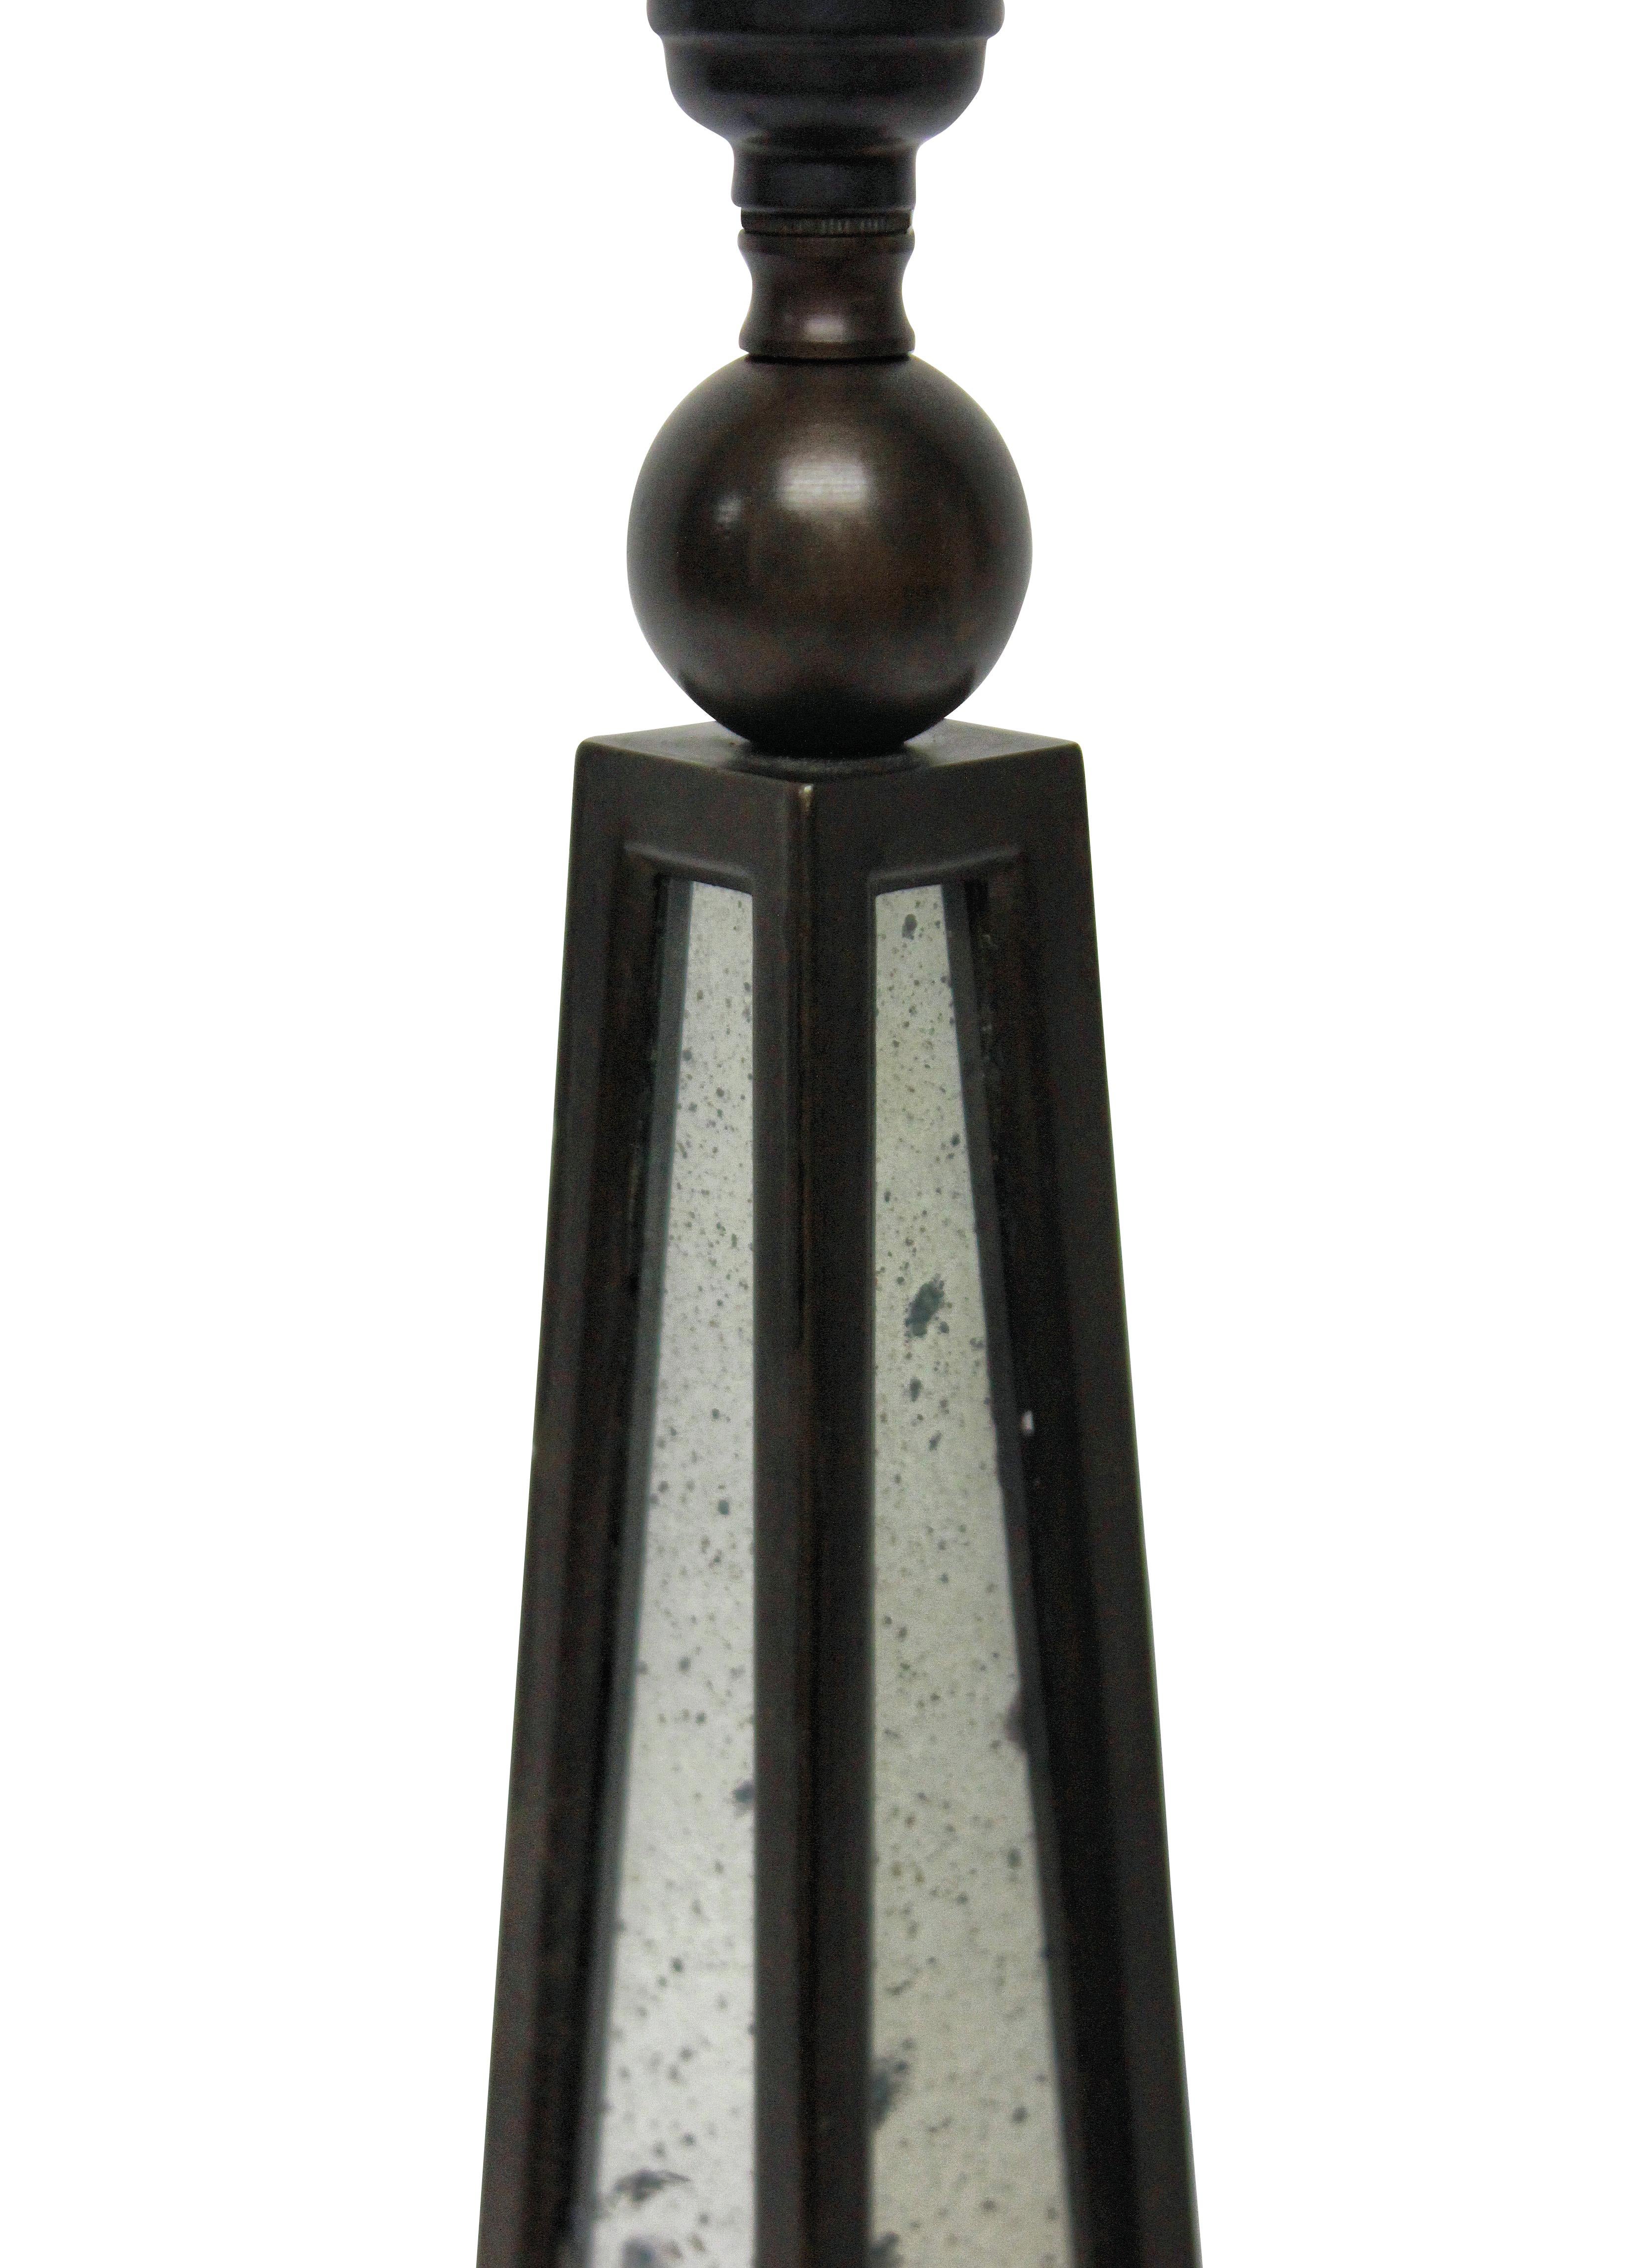 A pair of English bronzed obelisk lamps with distressed mirror panels.